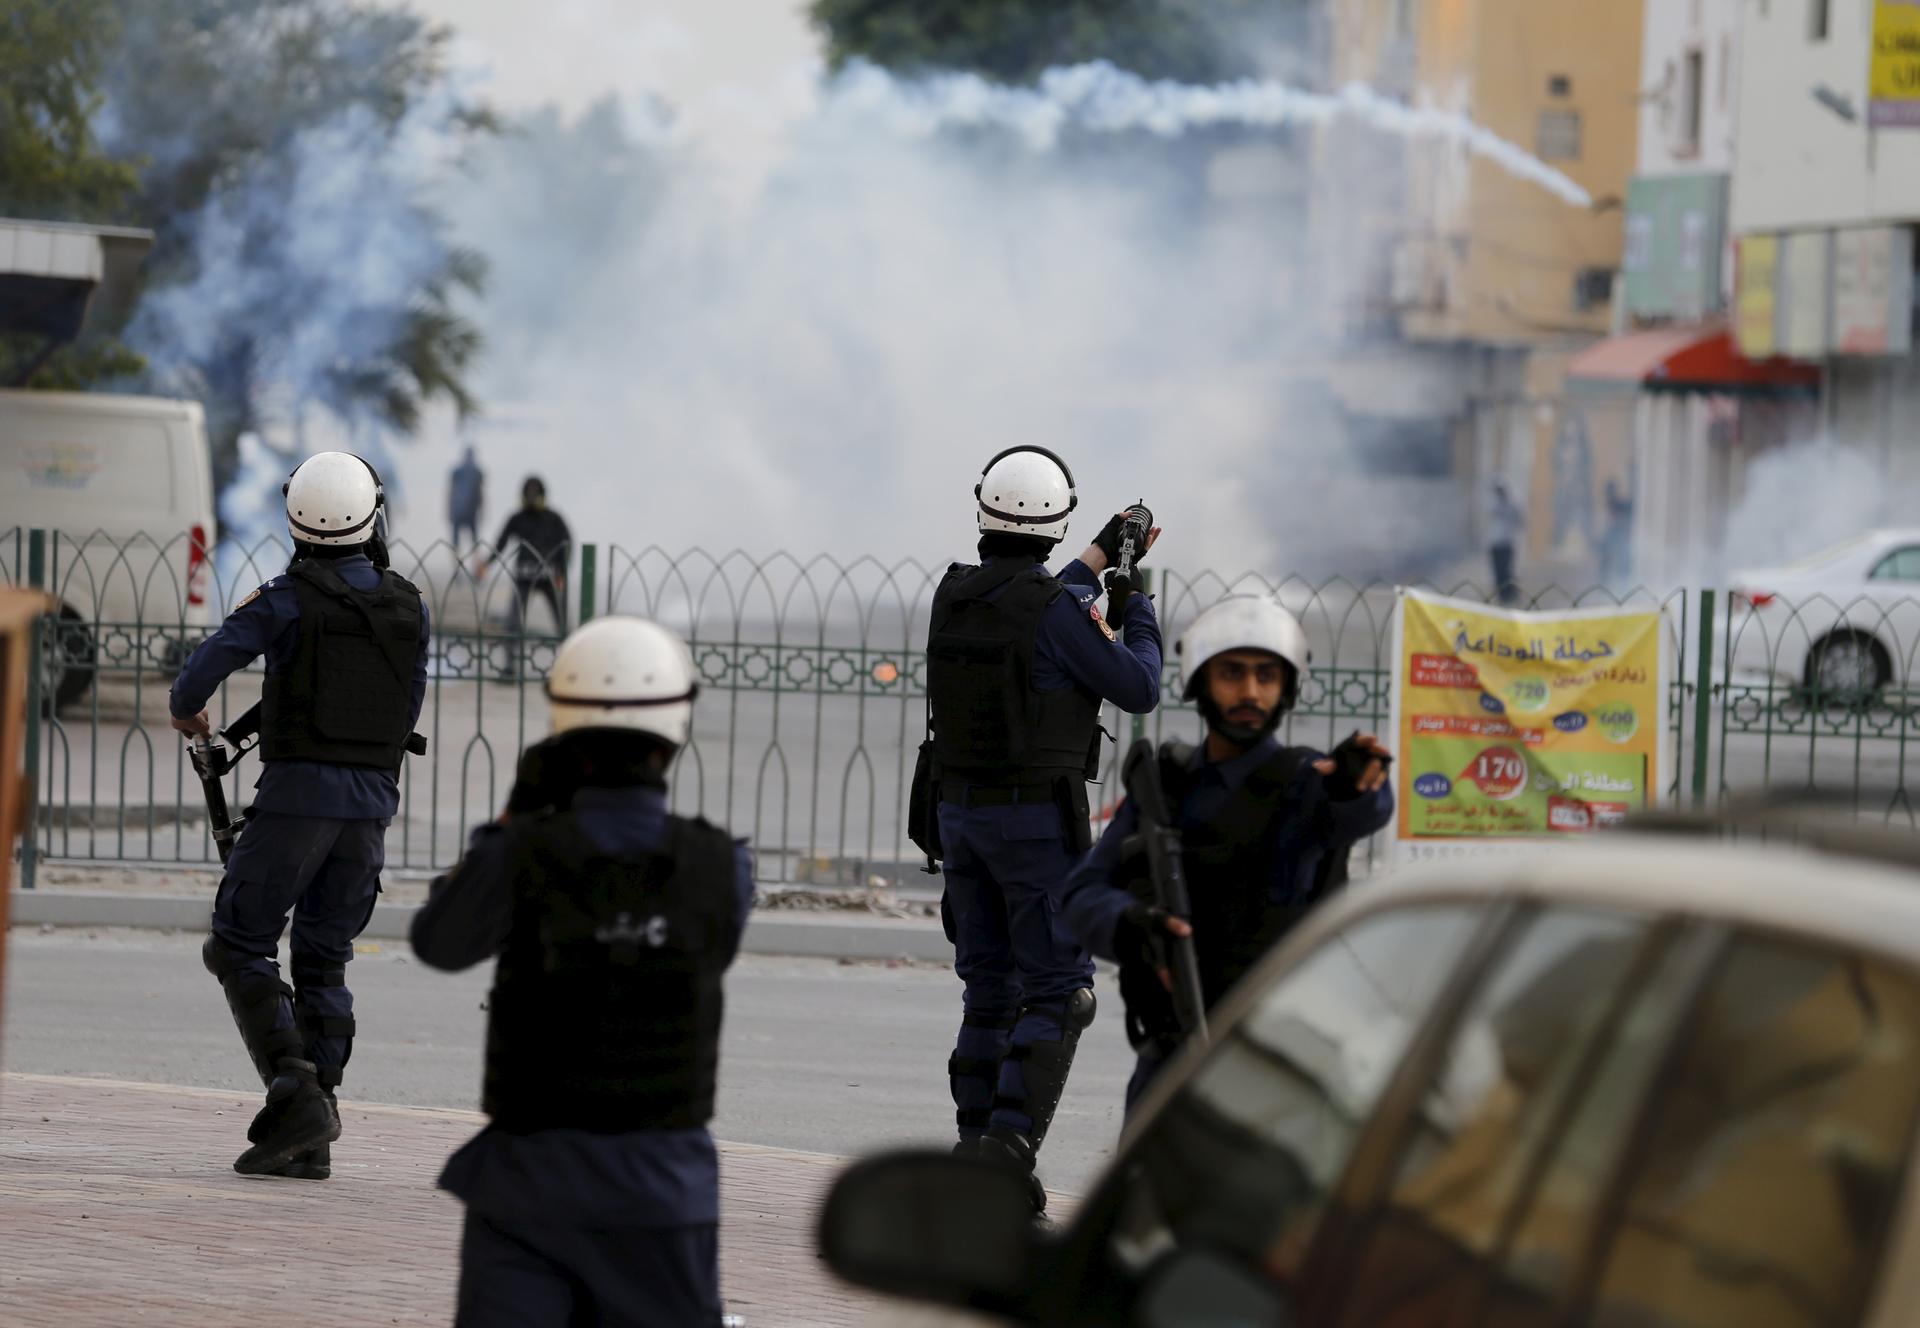 Riot police fires tear gas at protesters during clashes after a protest against the execution of prominent Shi'ite Muslim cleric Nimr al-Nimr by Saudi authorities in village of Sitra south of Manama, Bahrain, January 5, 2016.